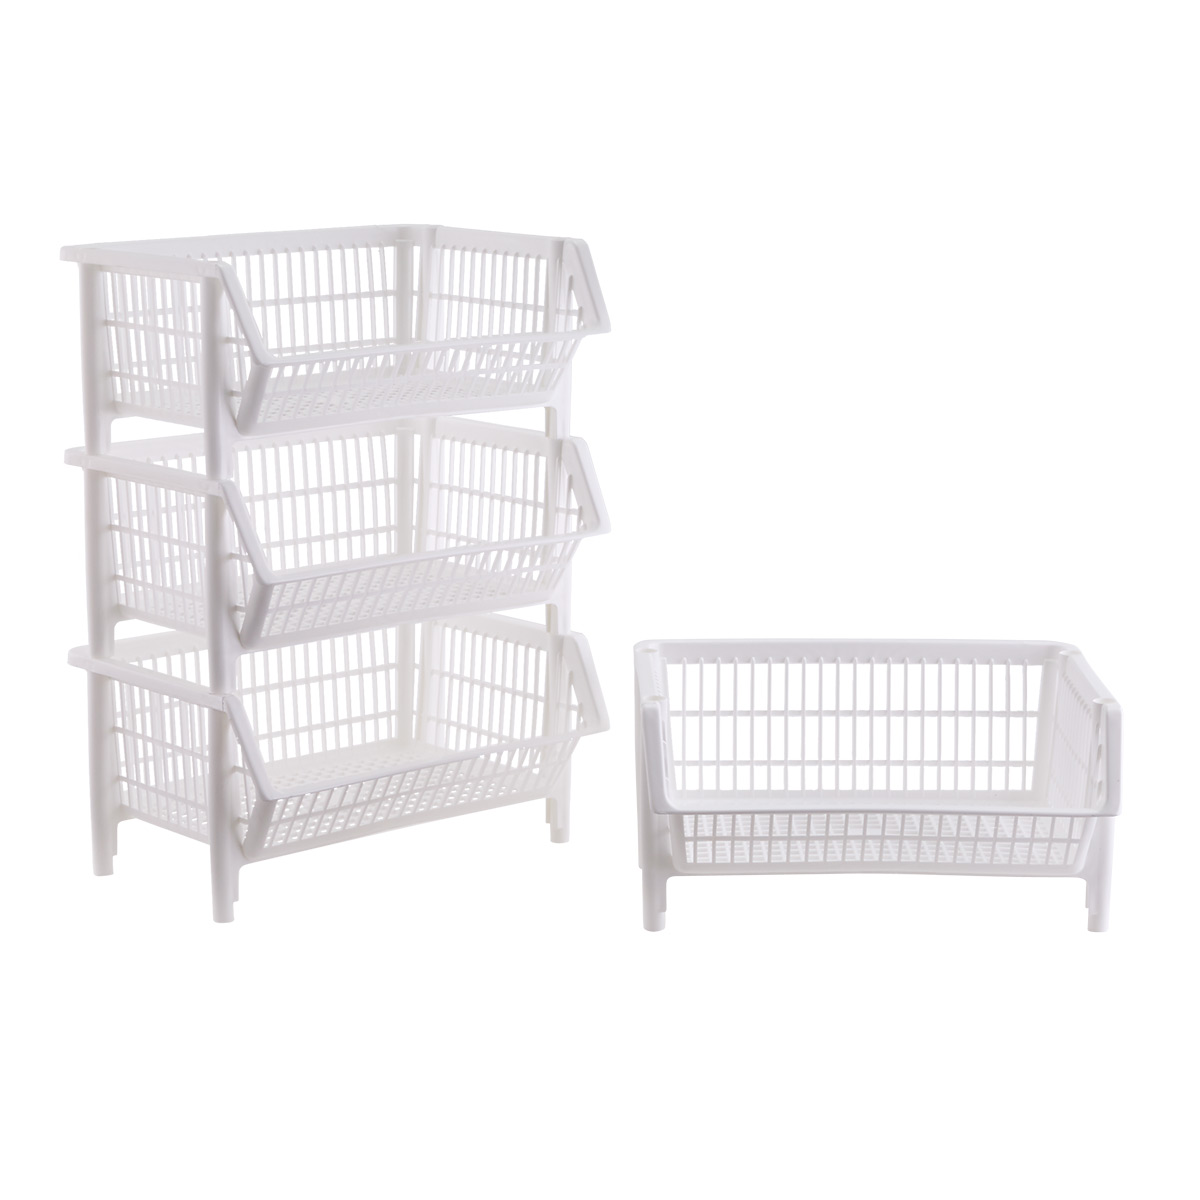 Our Stackable Baskets | The Container Store